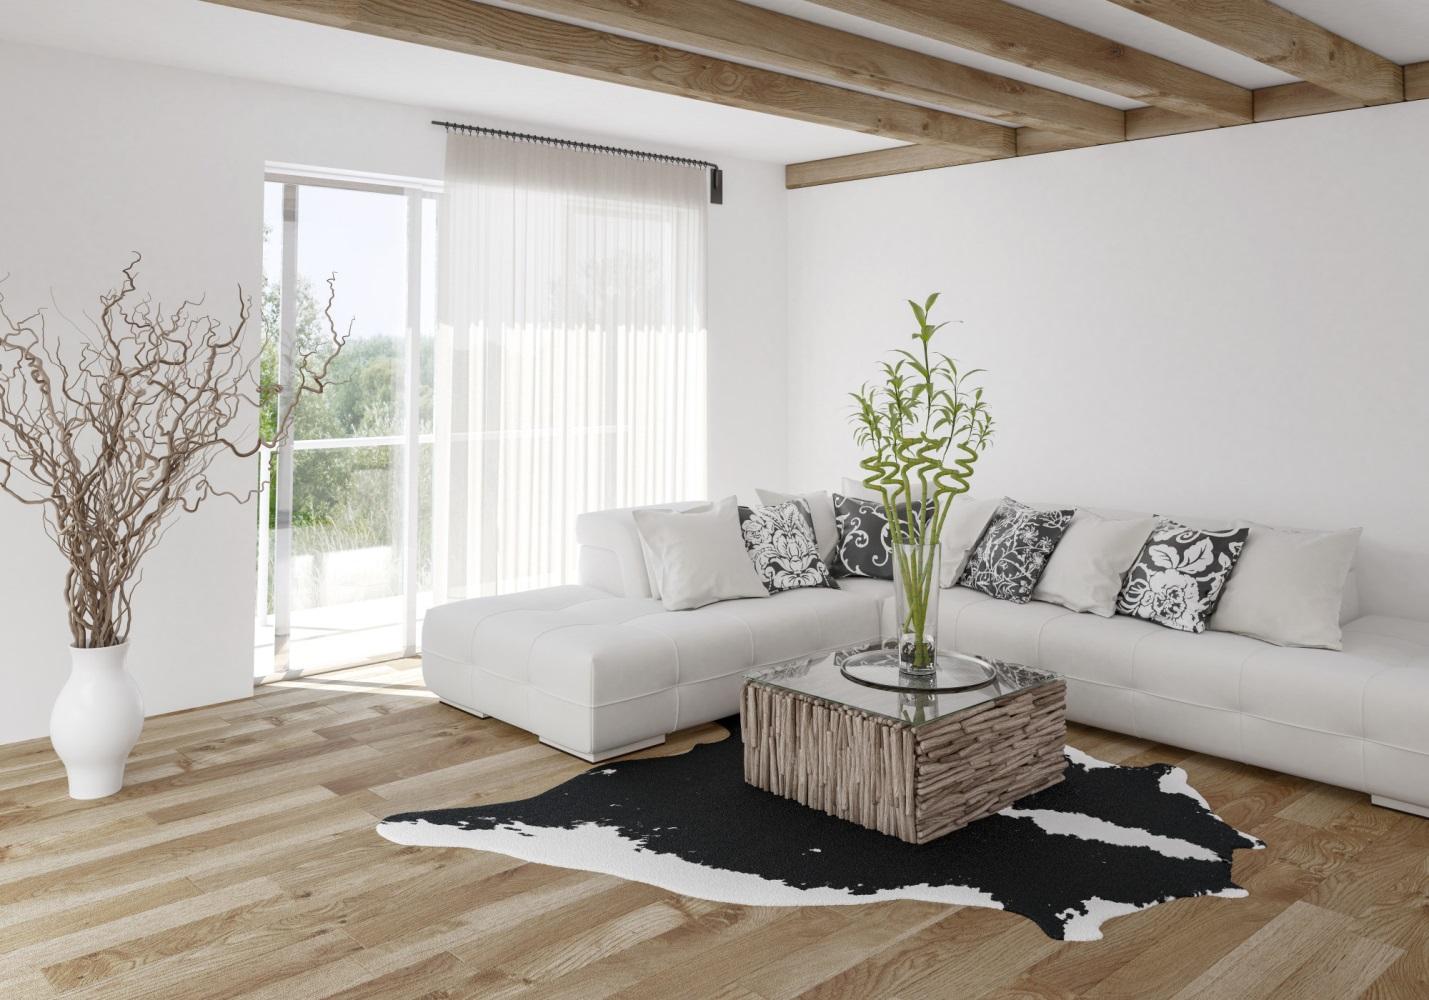 Home decor: A white living room with wooden beams and a black cowhide rug.